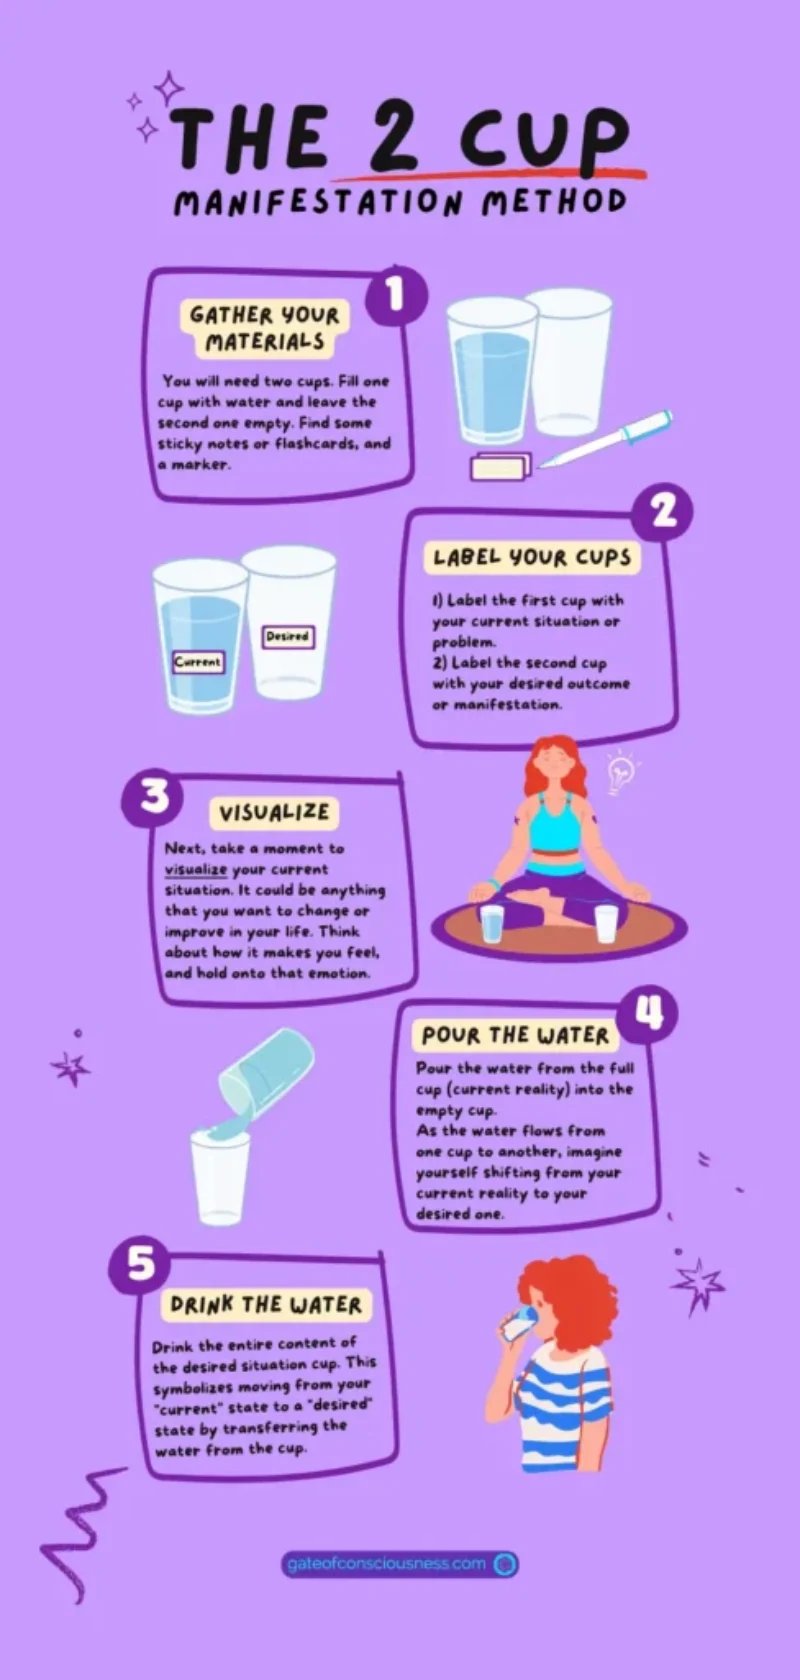 An infographic explaining the 5 steps of the 2 cup manifestation method